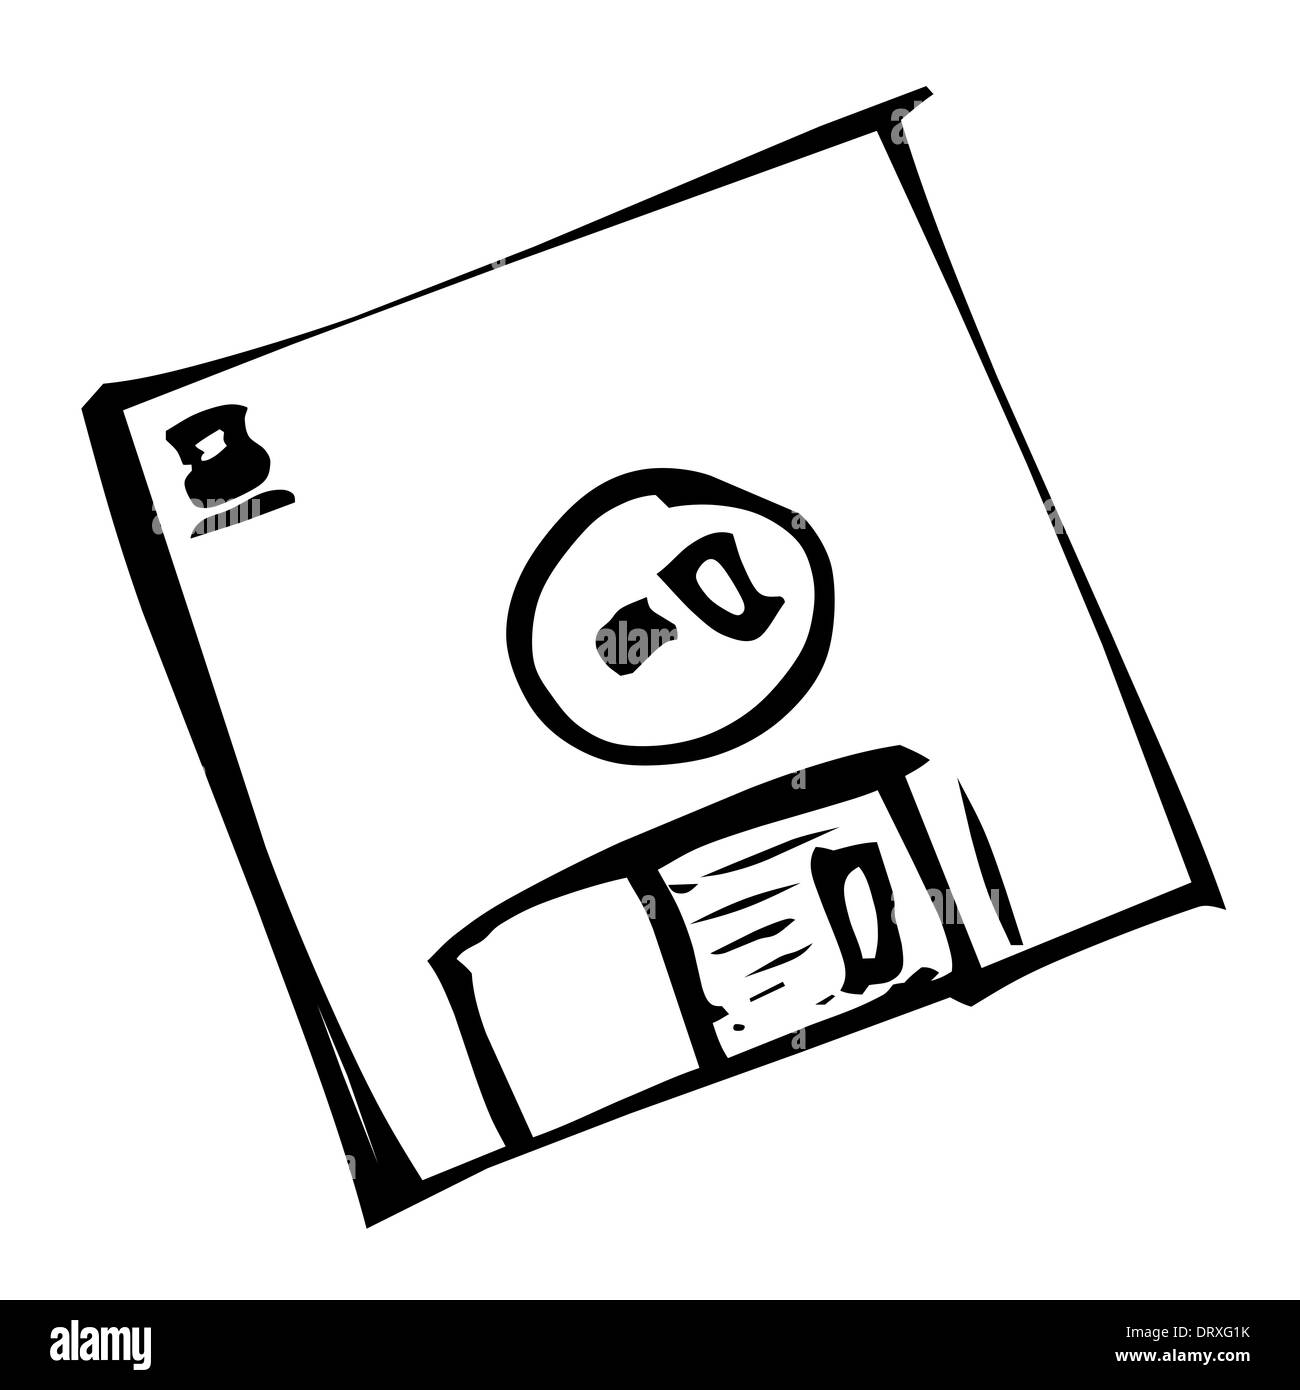 Illustration of a floppy disk on a white background. Stock Photo